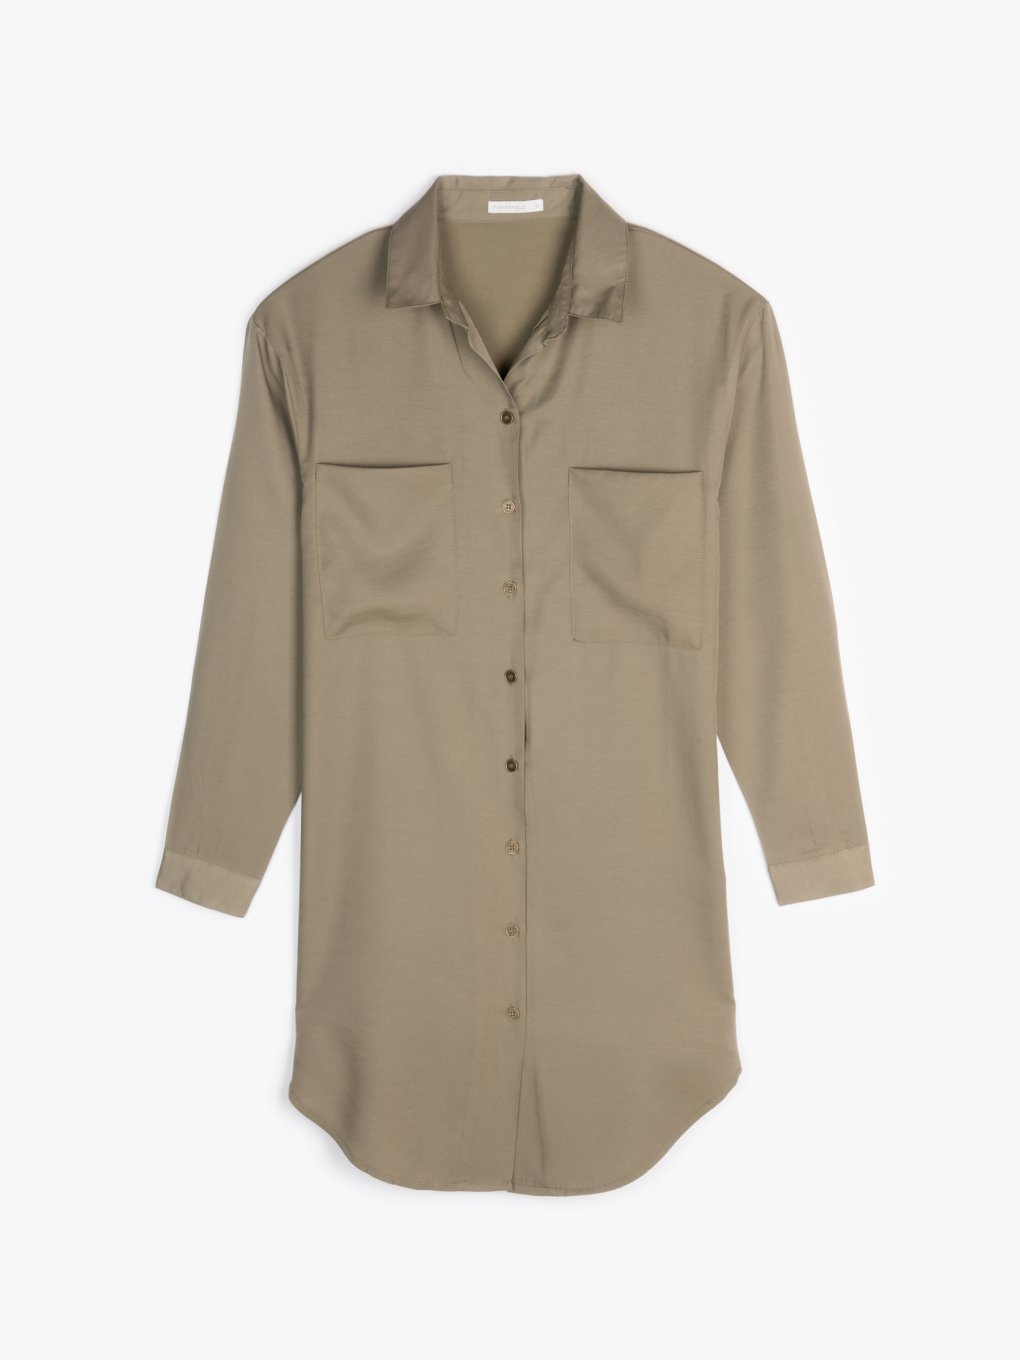 PREMIUM COLLECTION: Oversized loose-fit button down blouse